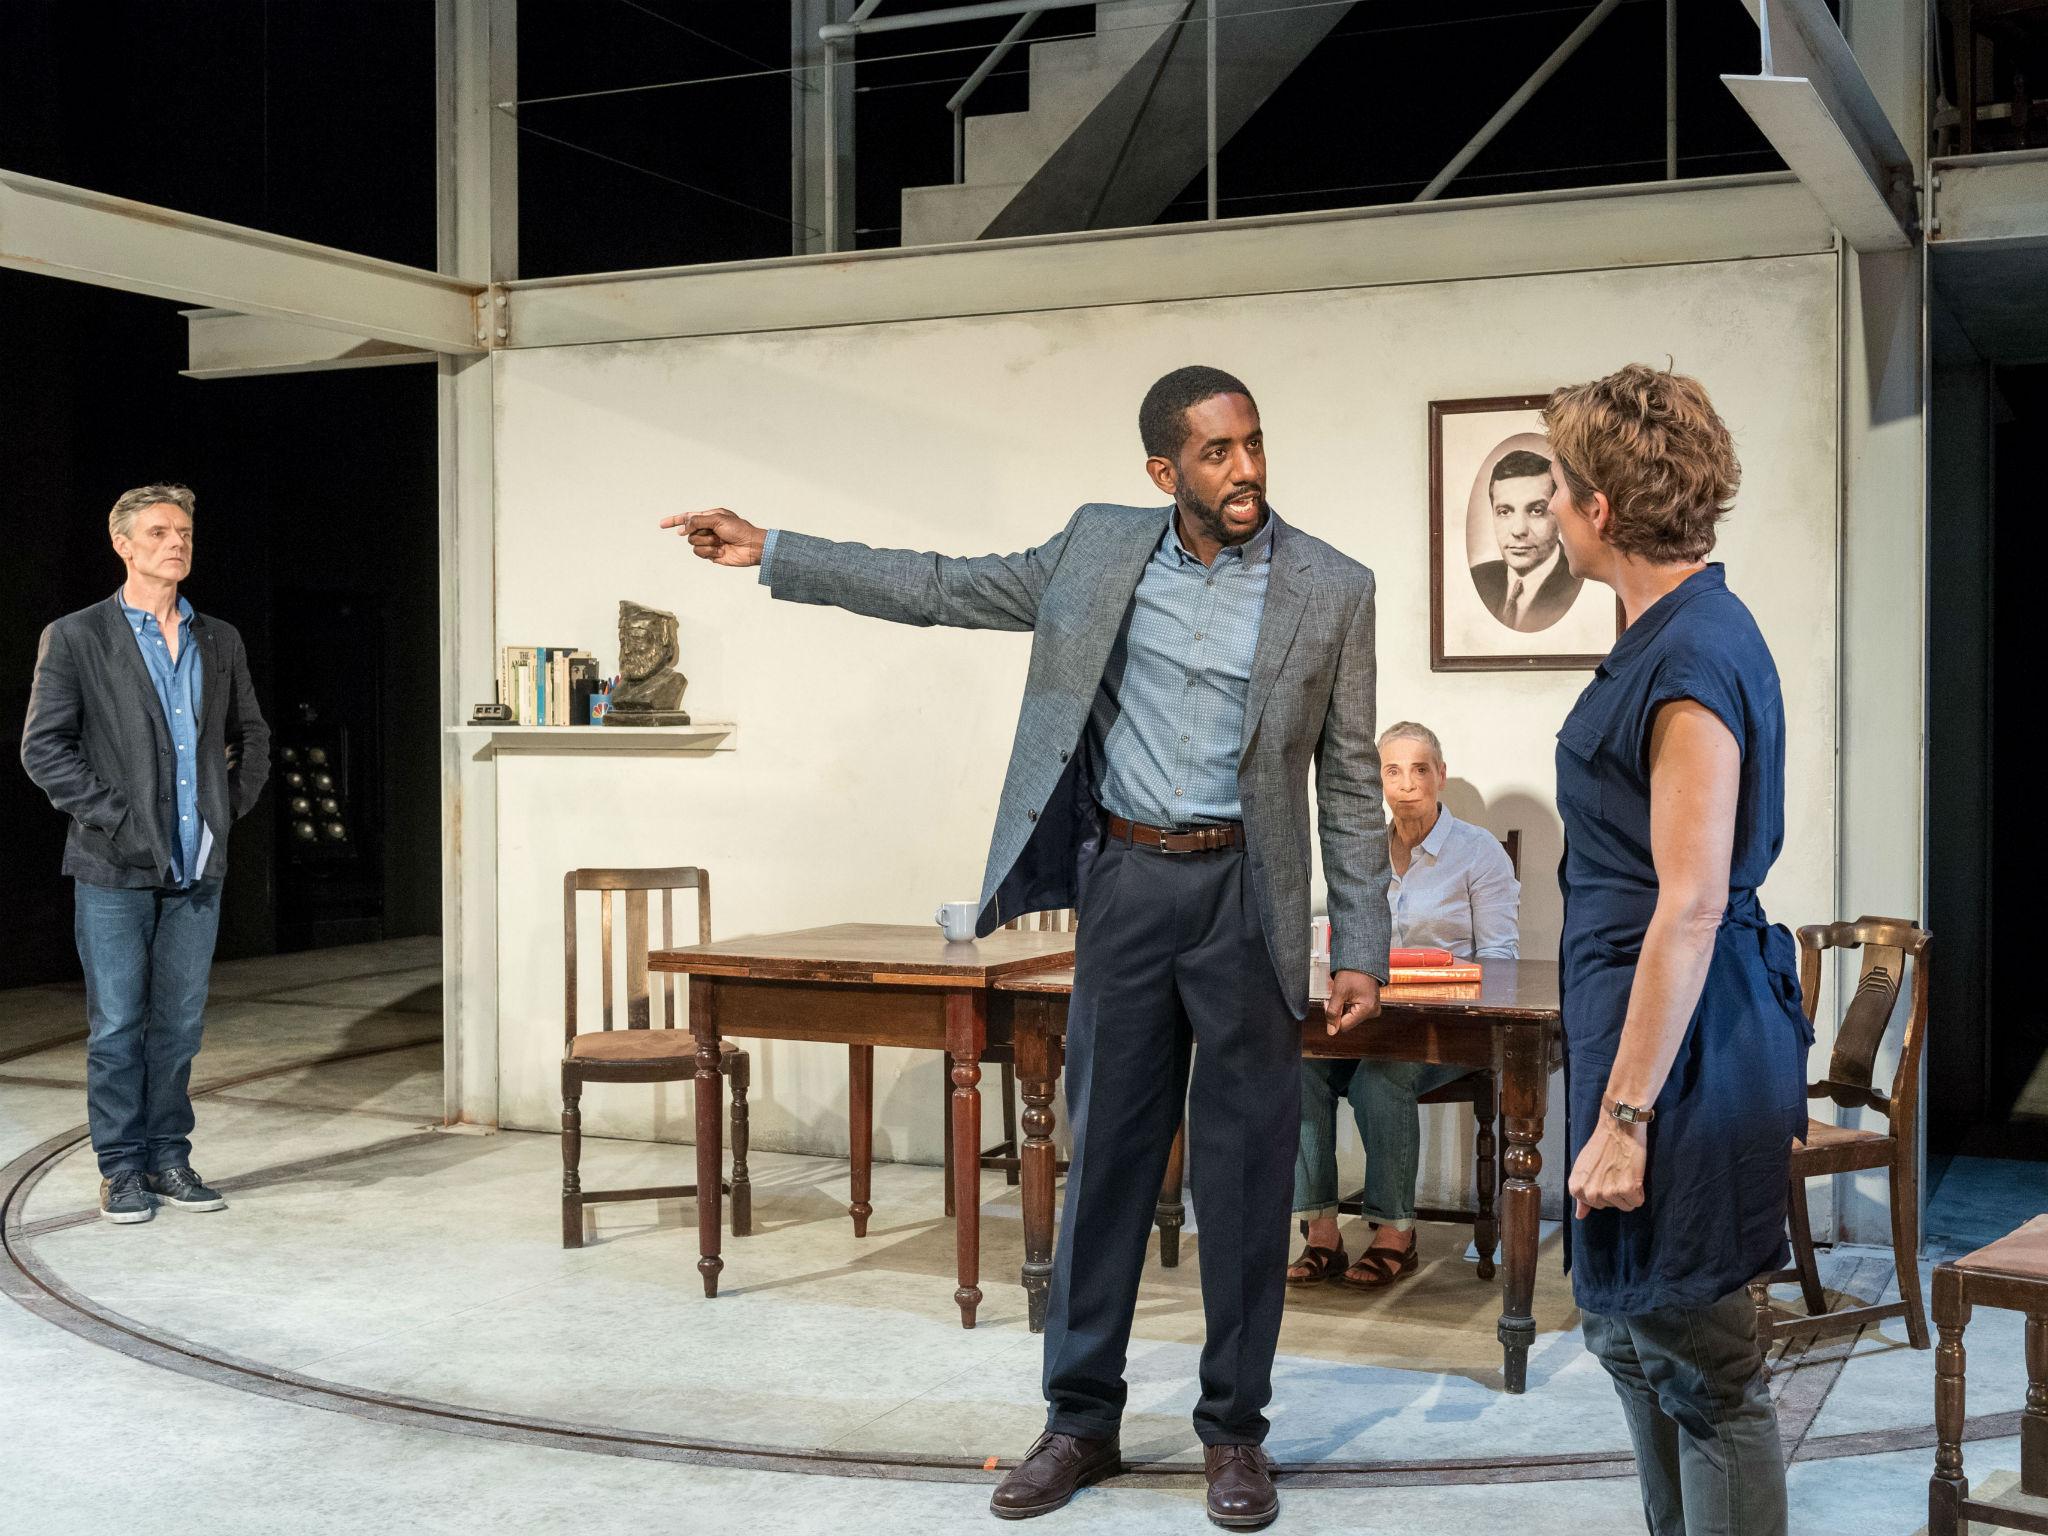 Heated family arguments: Richard Clothier (Pill), Tamsin Grieg (Empty) and Rushan Stone (Paul) in The Intelligent Homosexual's Guide to Capitalism and Socialism With A Key to the Scriptures at Hampstead Theatre